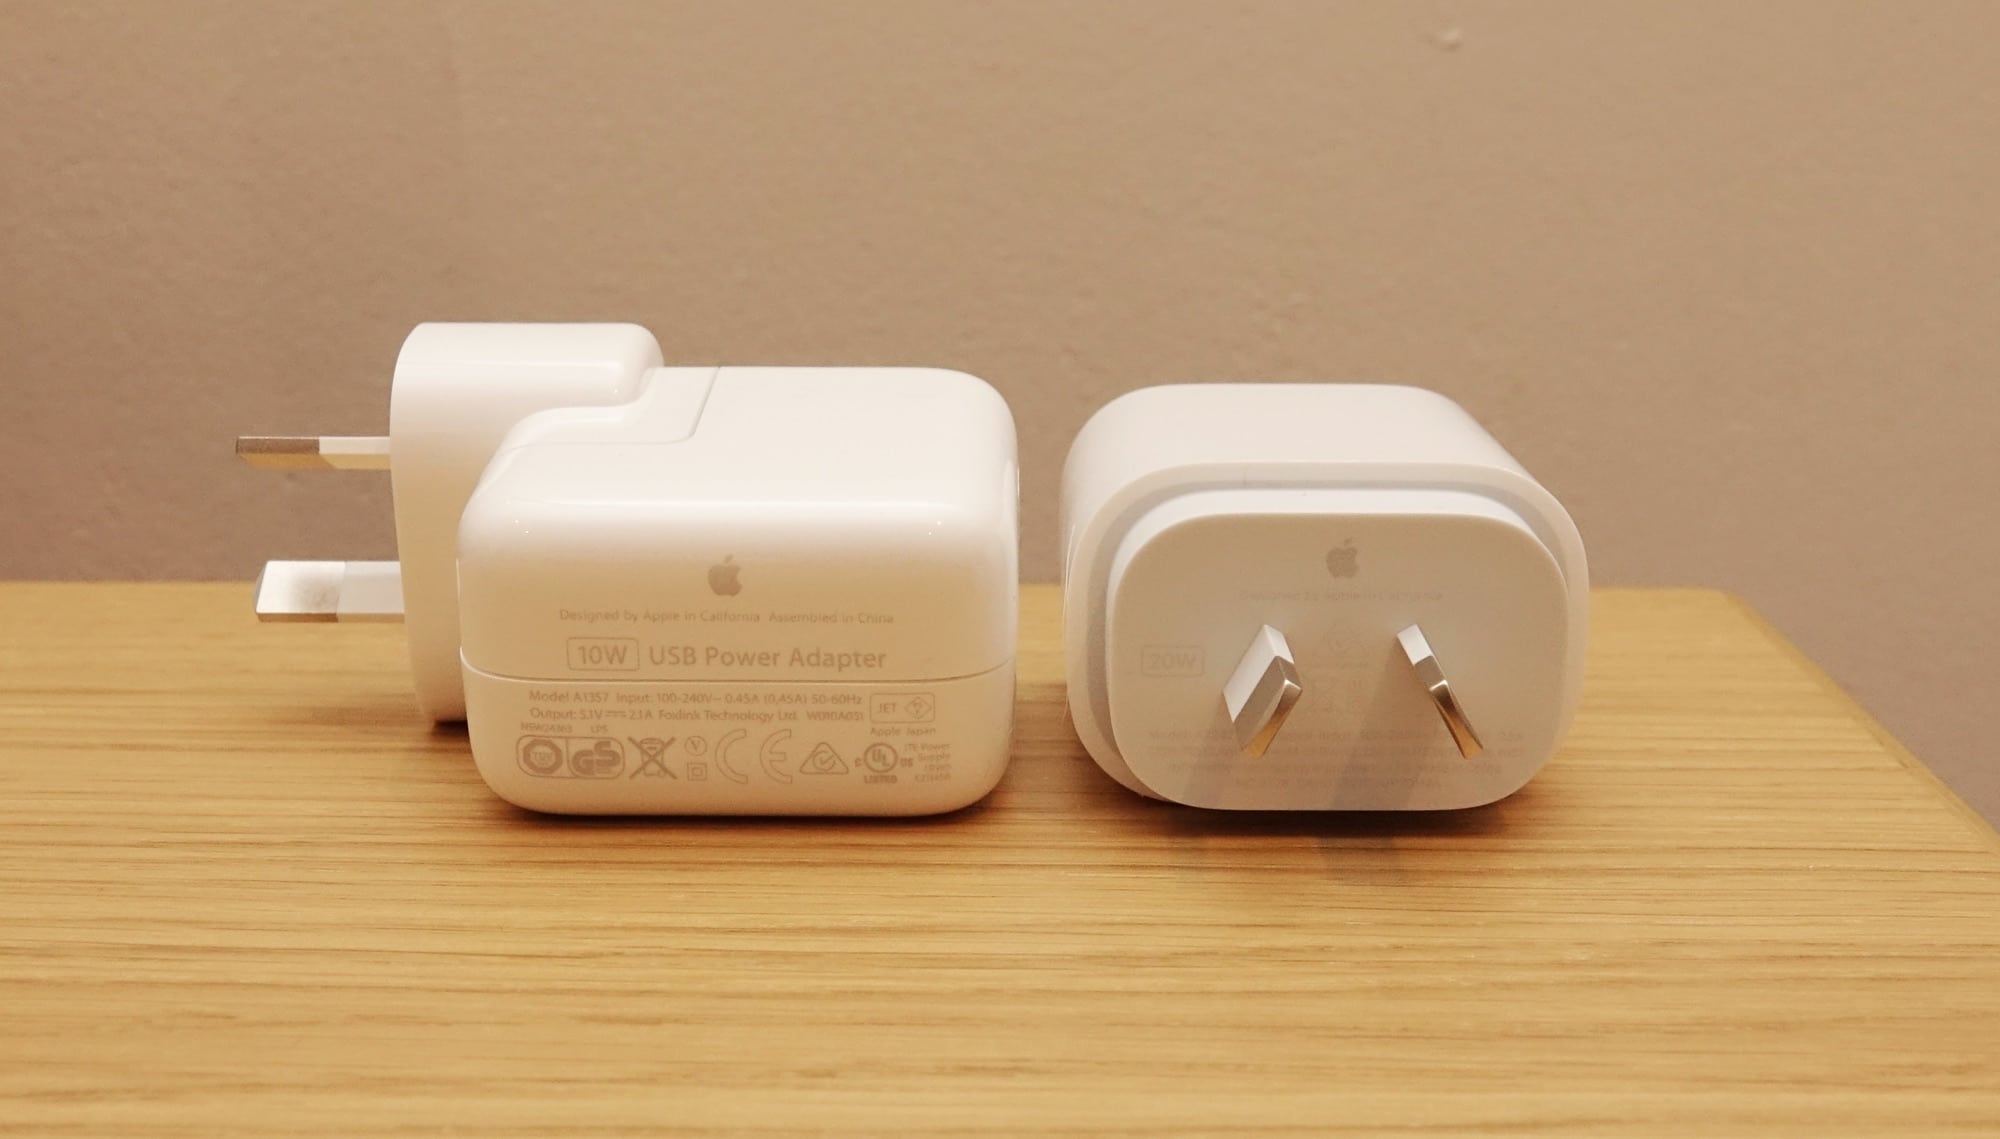 The difference in iPad charge connectors: the 10W with the iPad 7th gen (left) vs the 20W with the iPad 8th gen